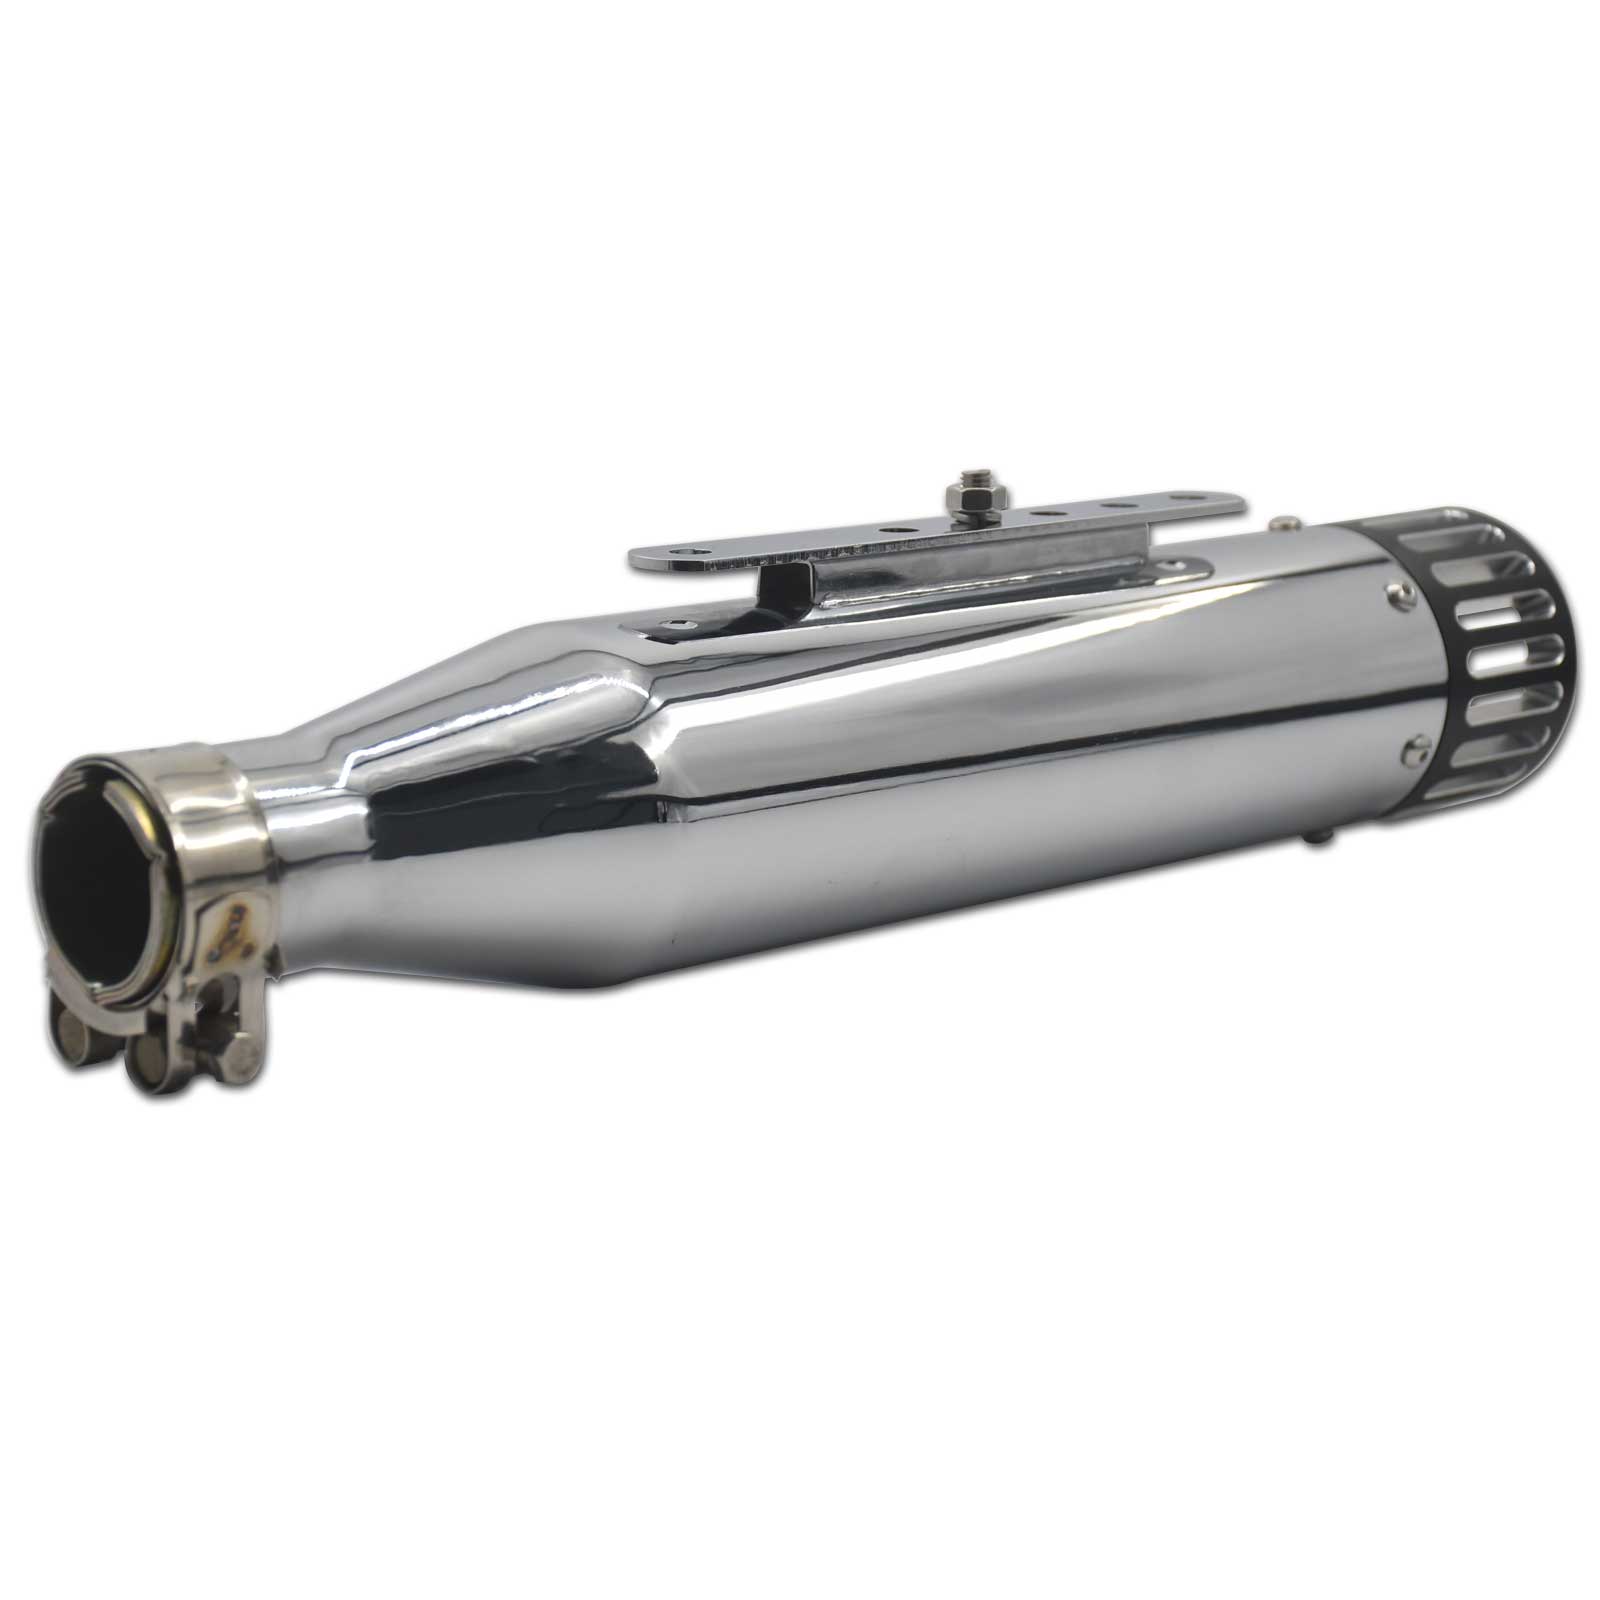 Vintage 38-45mm Exhaust Muffler With CNC Tail Pipe